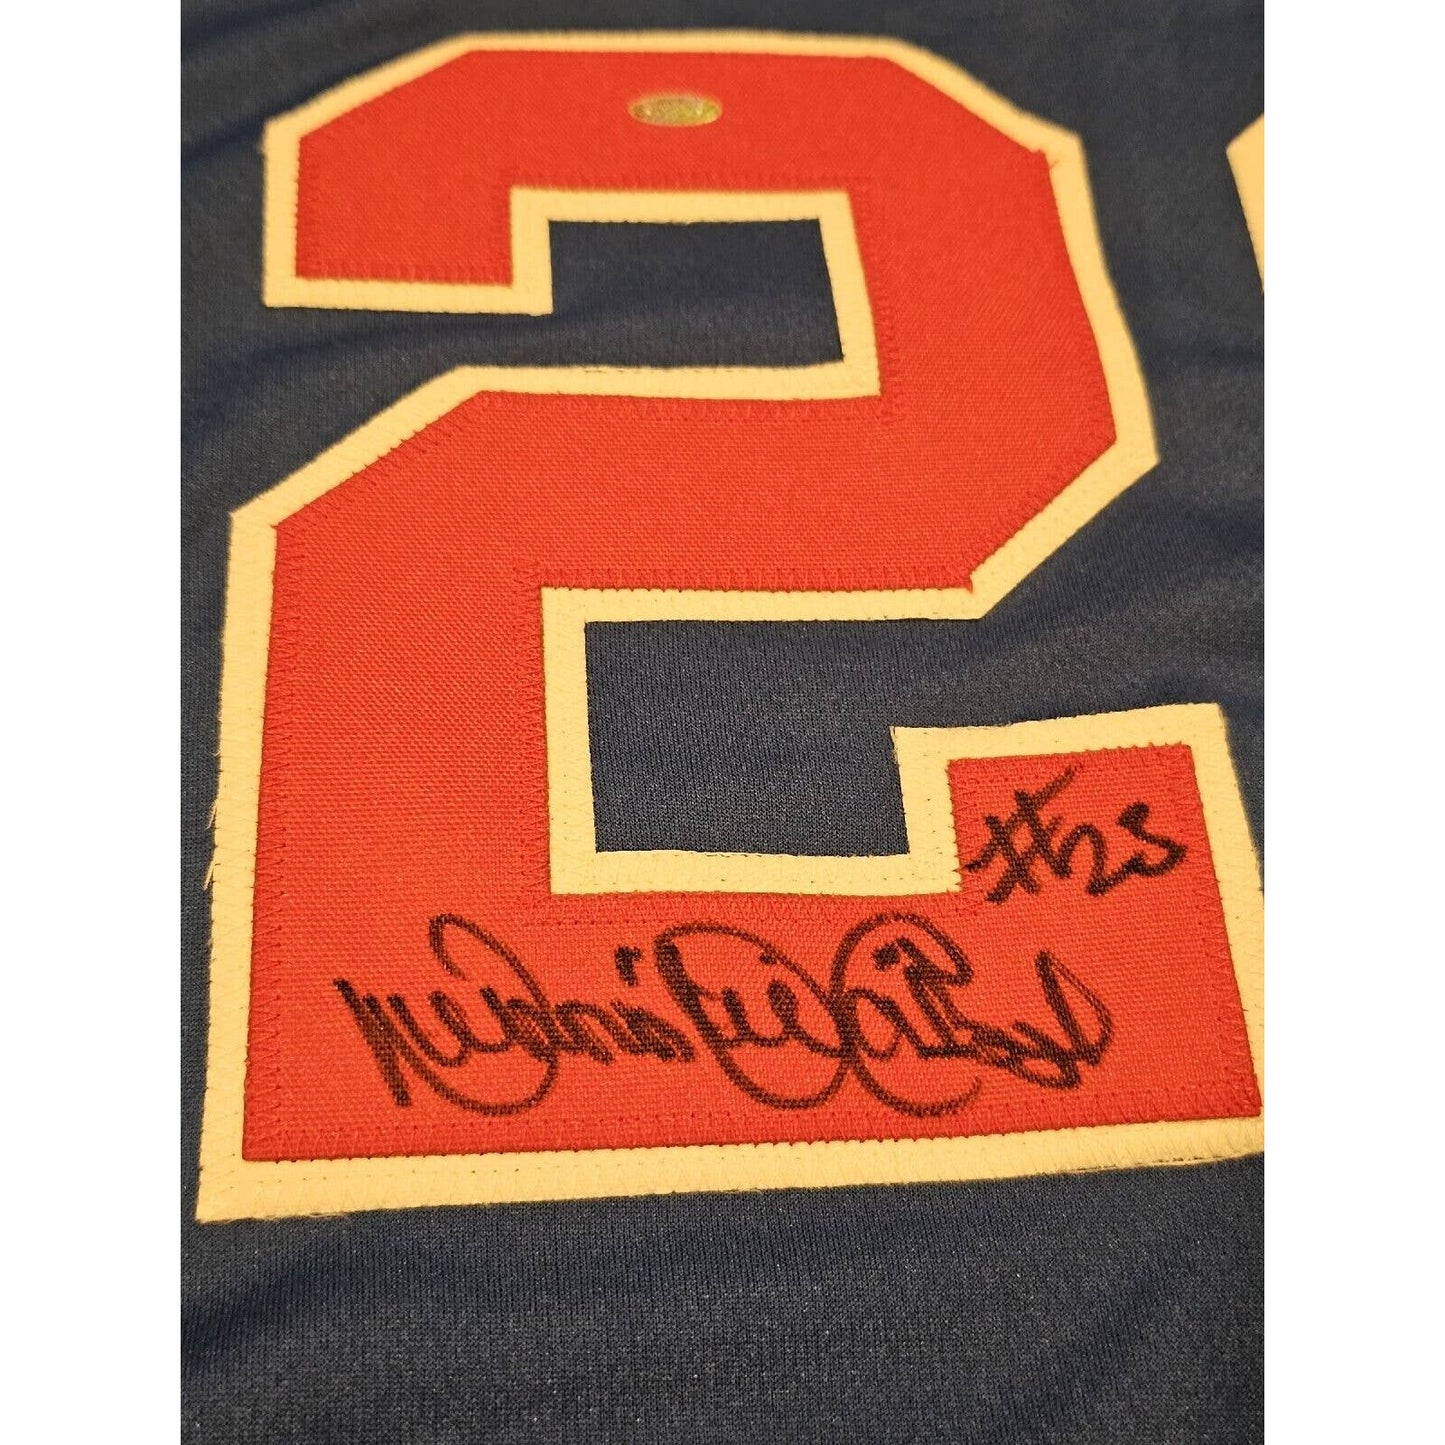 Dennis "Oil Can" Boyd Autographed/Signed Jersey Montreal Expos